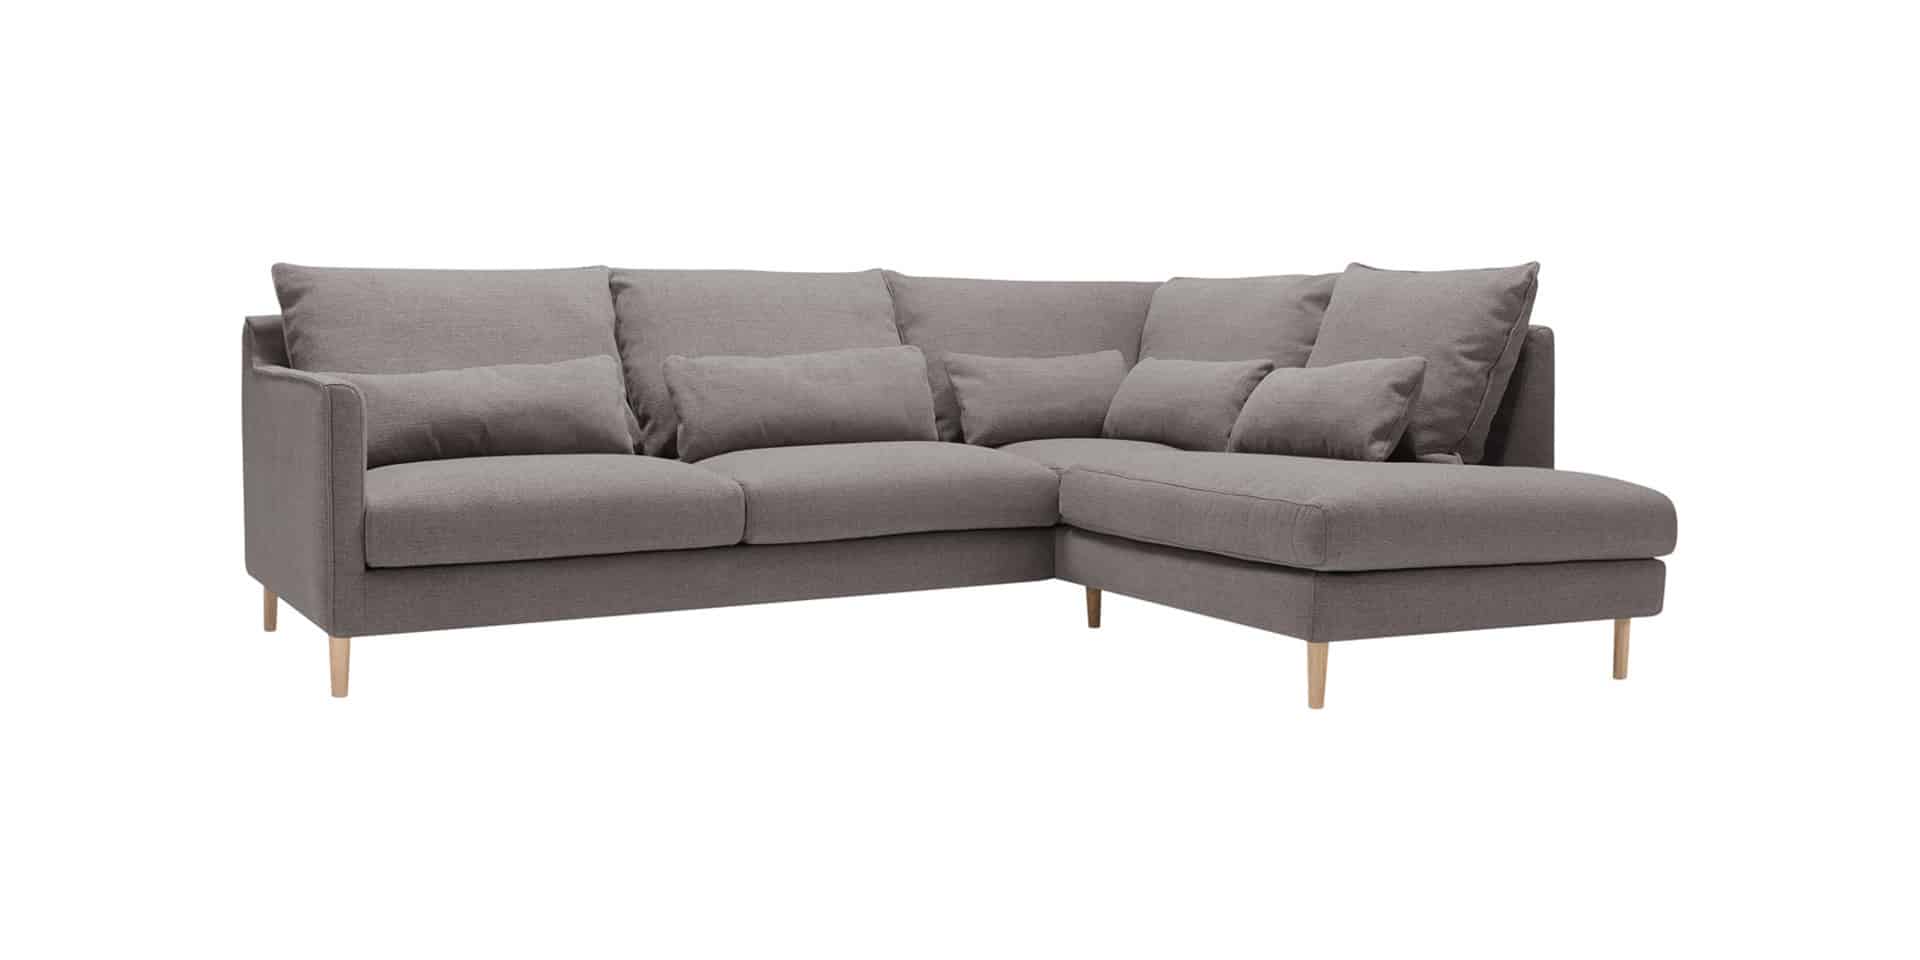 sally right corner sectional sofa bed